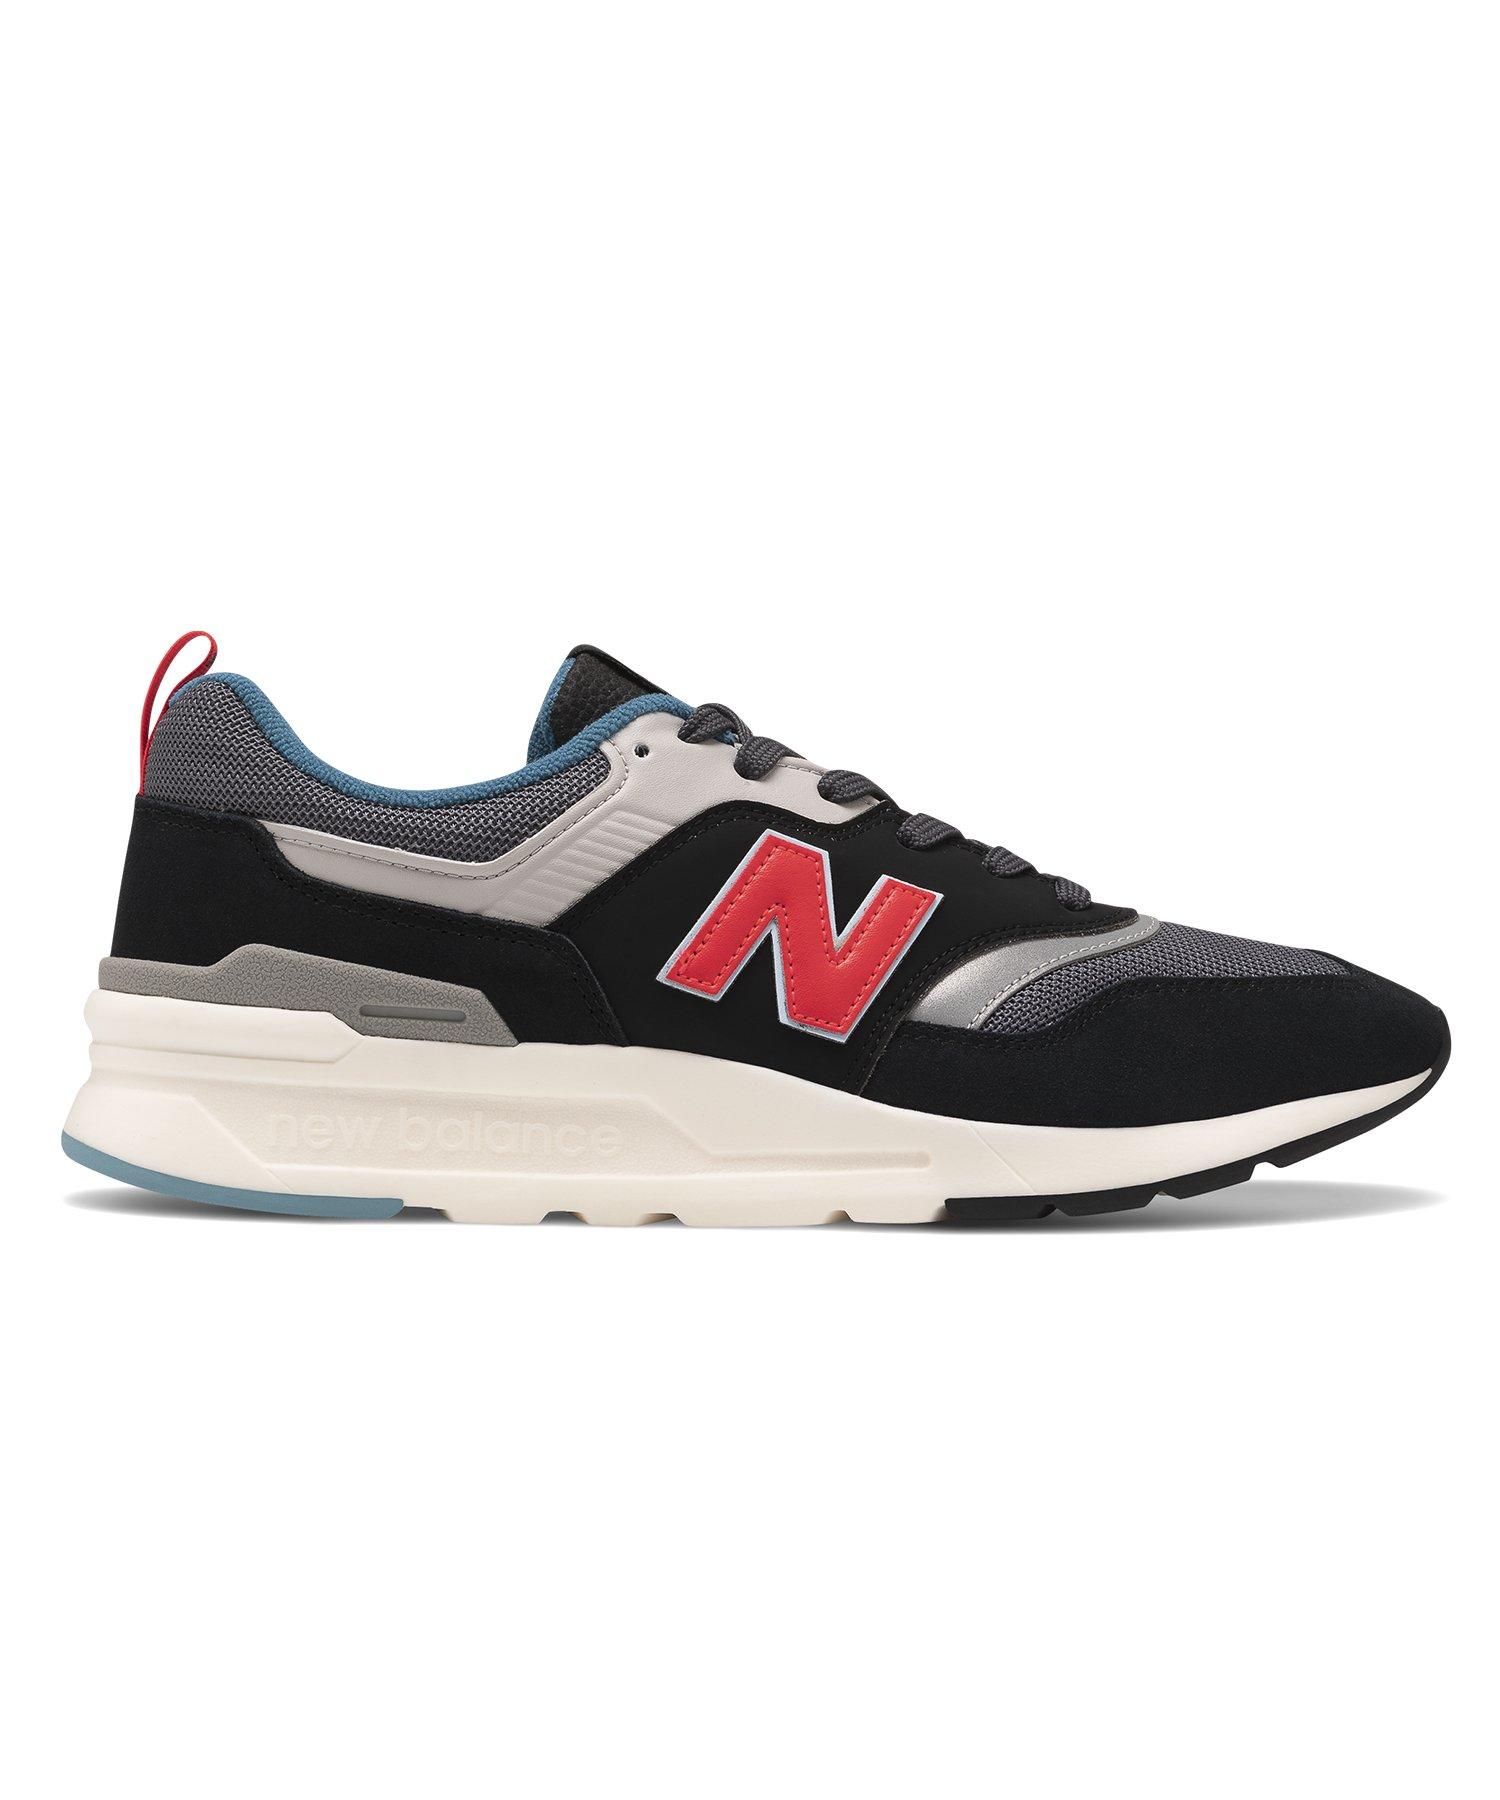 New Balance Suede 997h Magnet With Energy Red in Black for Men - Lyst